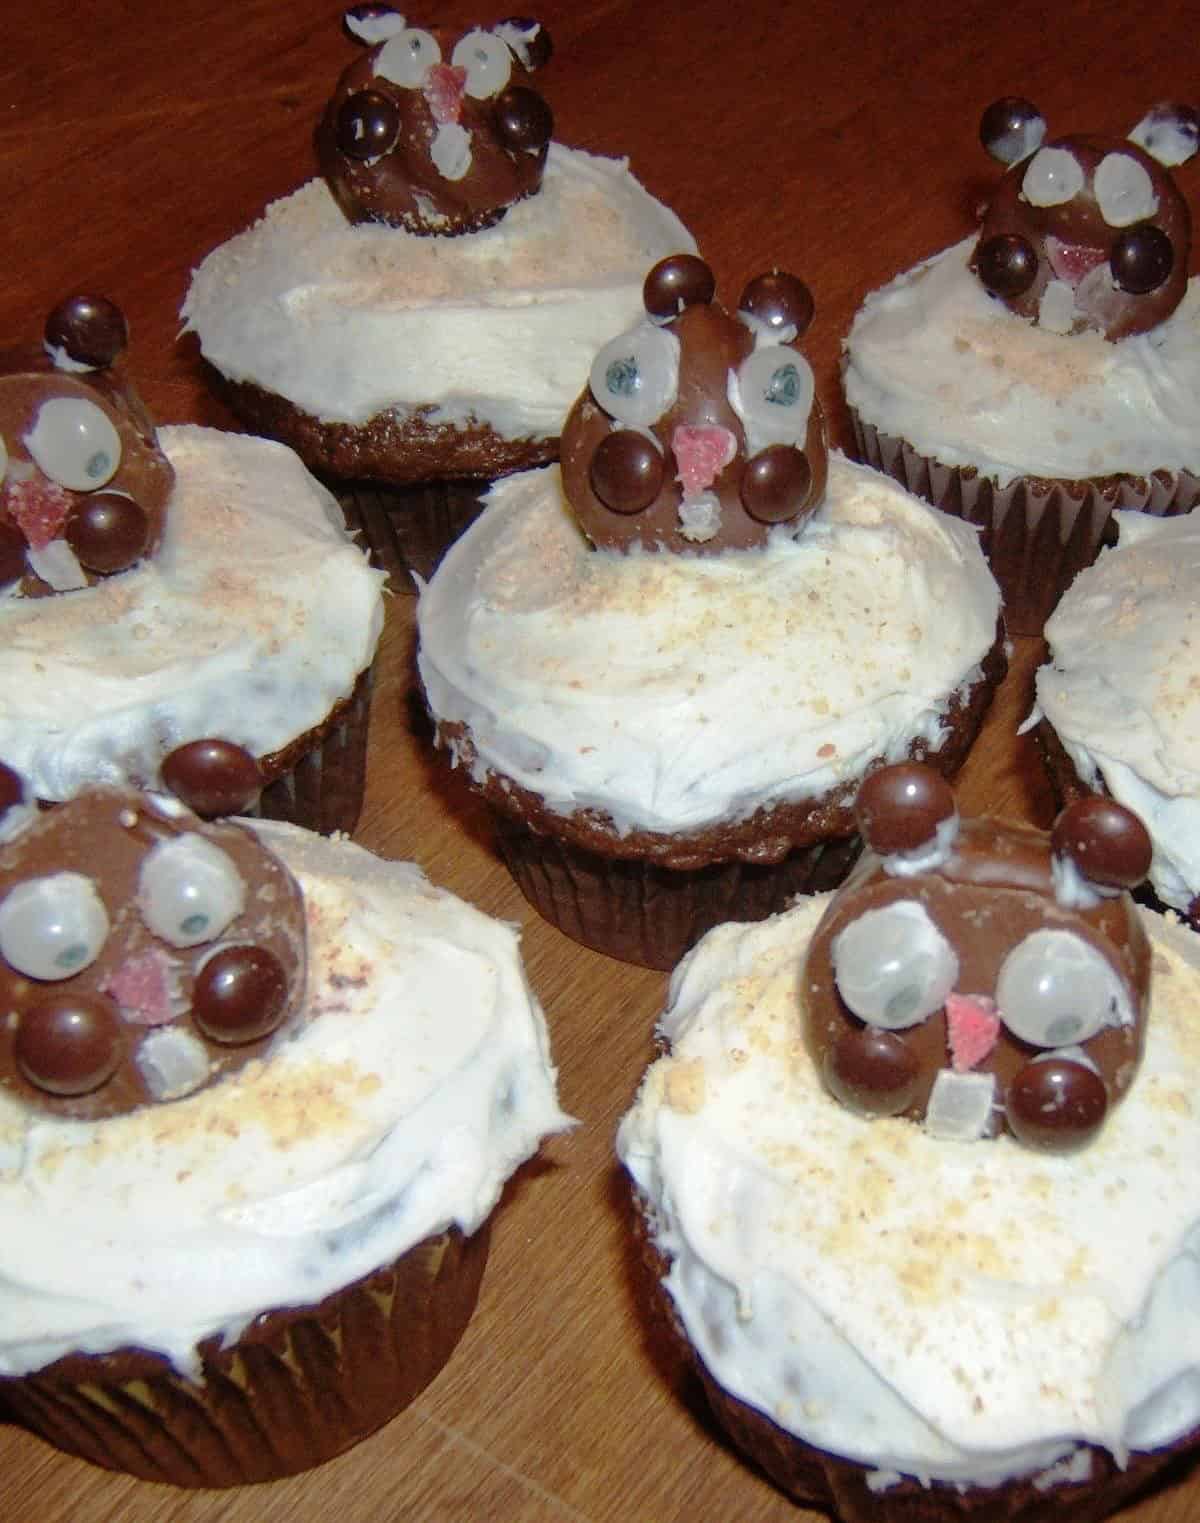  Make your Groundhog Day celebration extra sweet with these festive cupcakes.